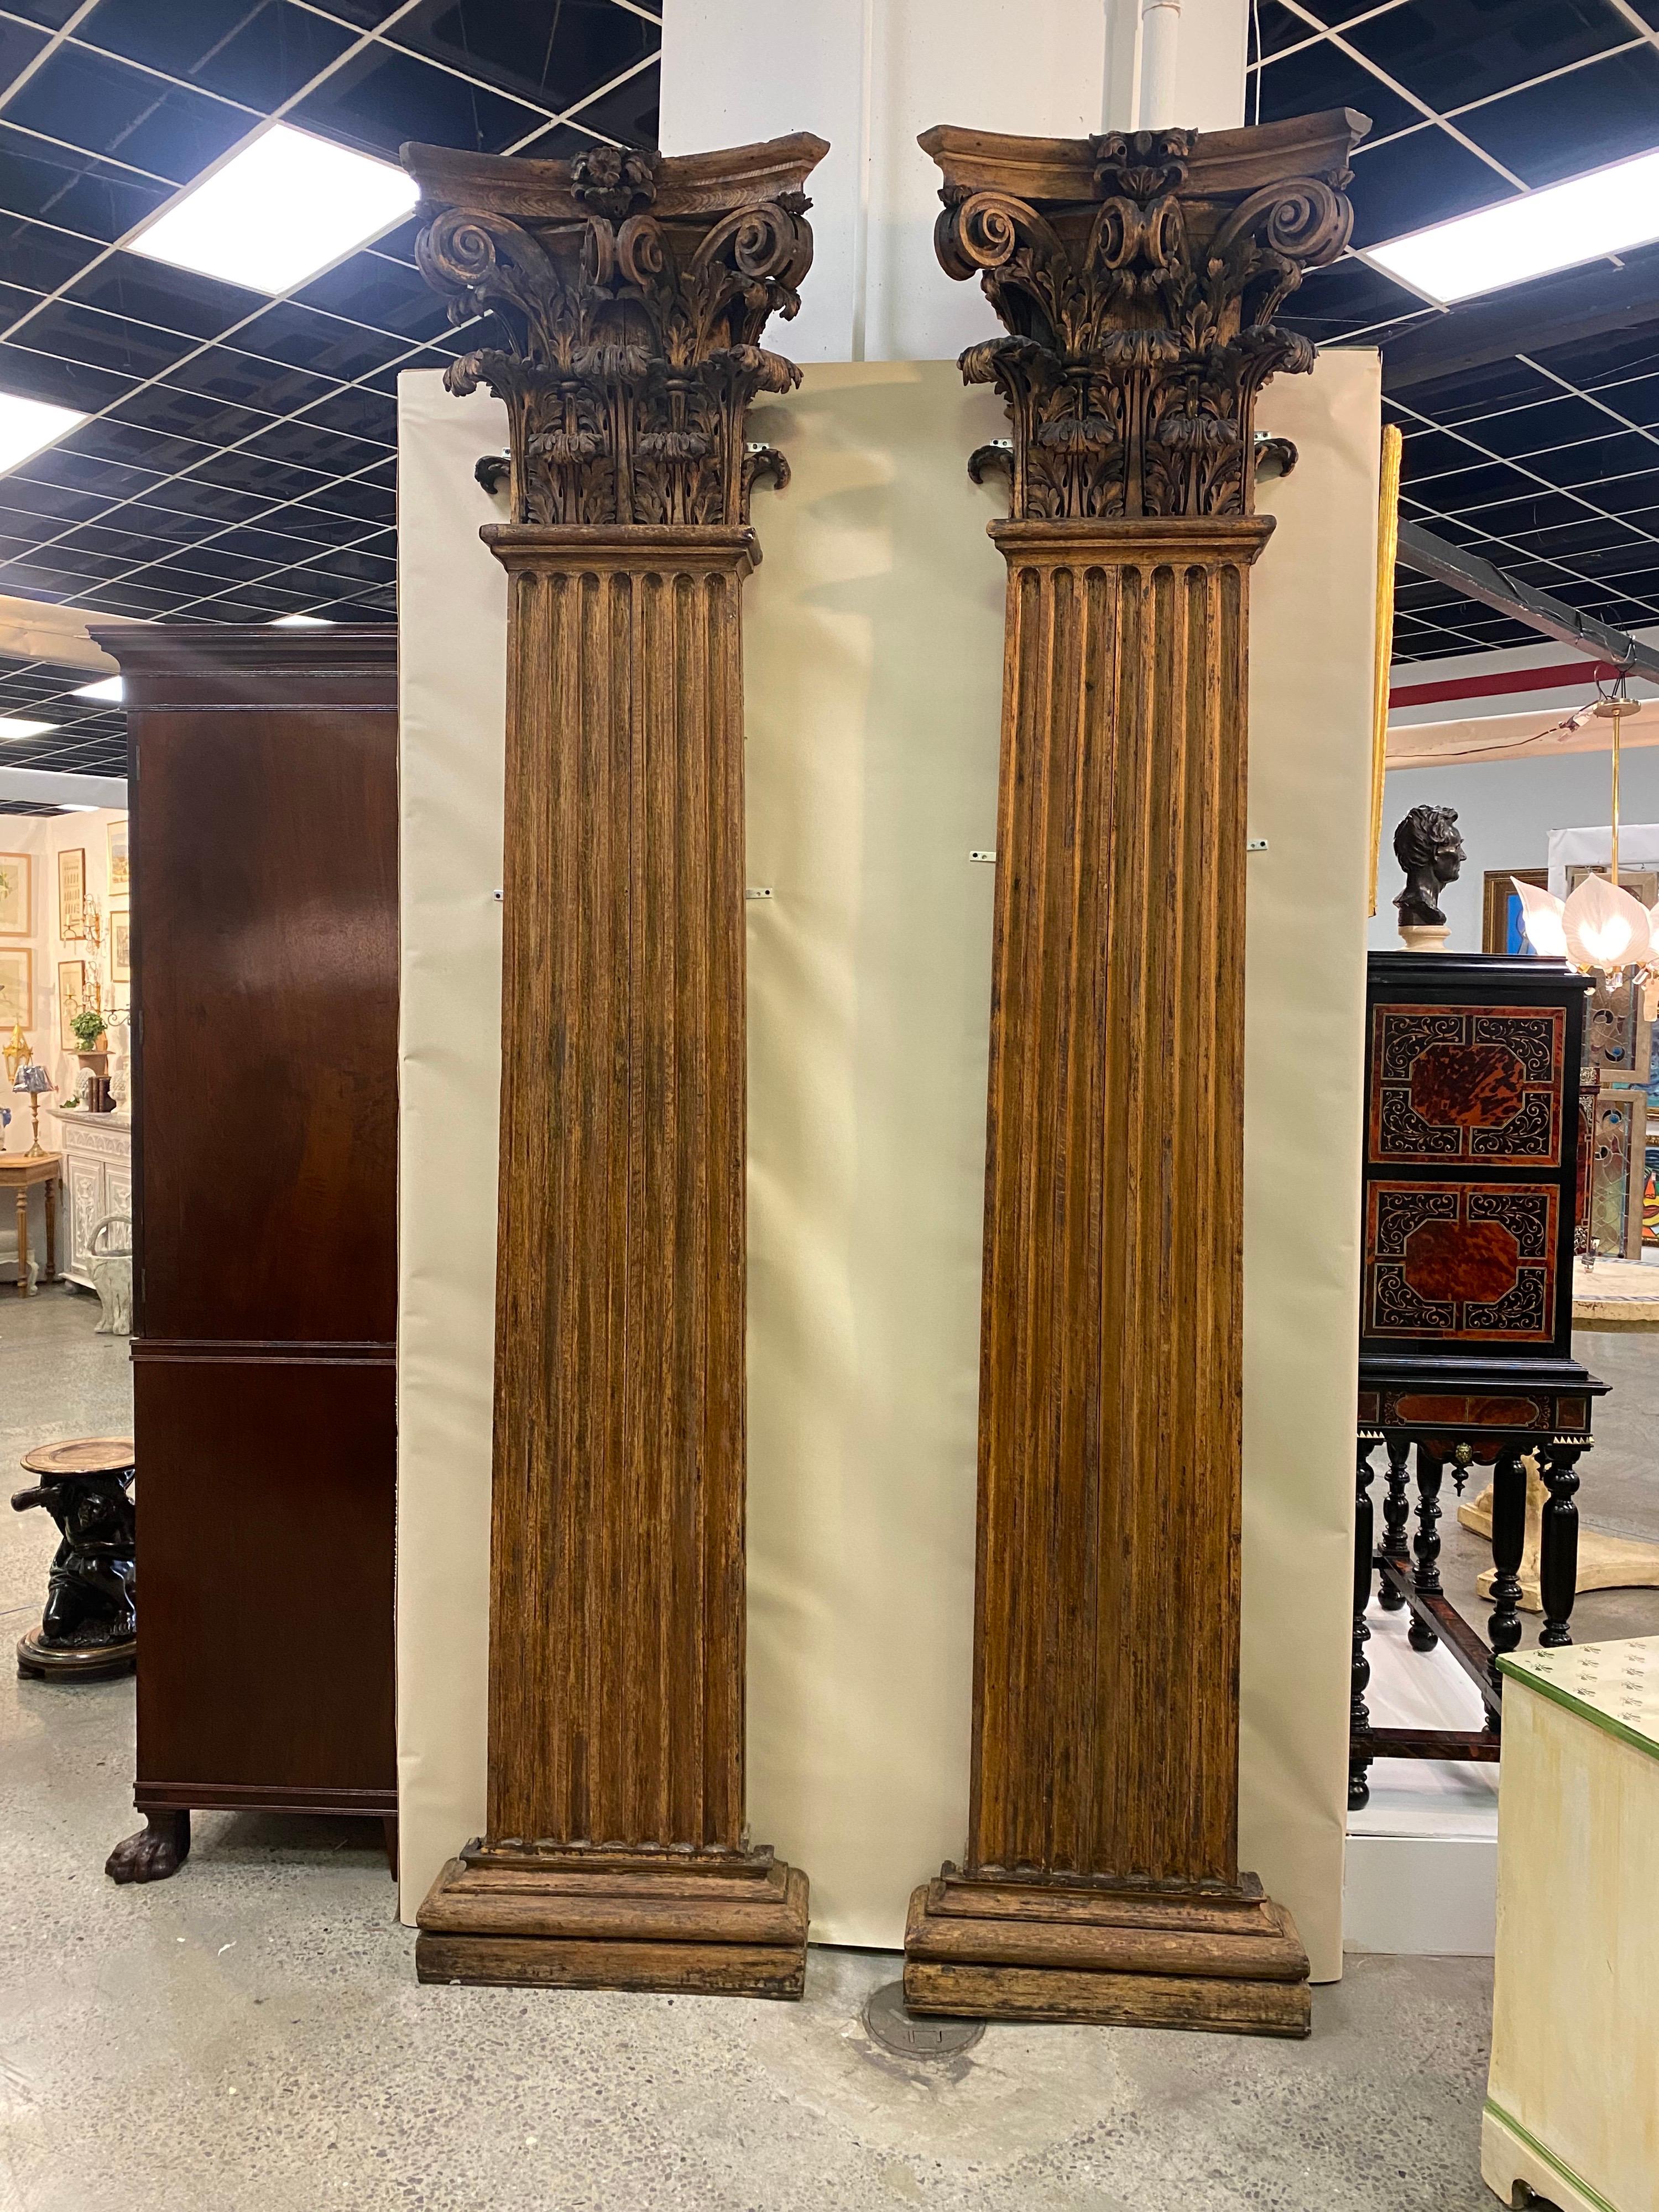 Absolutely stunning pair of 19th century hand carved neoclassical oak pilasters. 3 part pilasters to be wall mounted, with meticulously carved capitals with the perfect patina and color. Would really make a statement flanking a doorway or centered